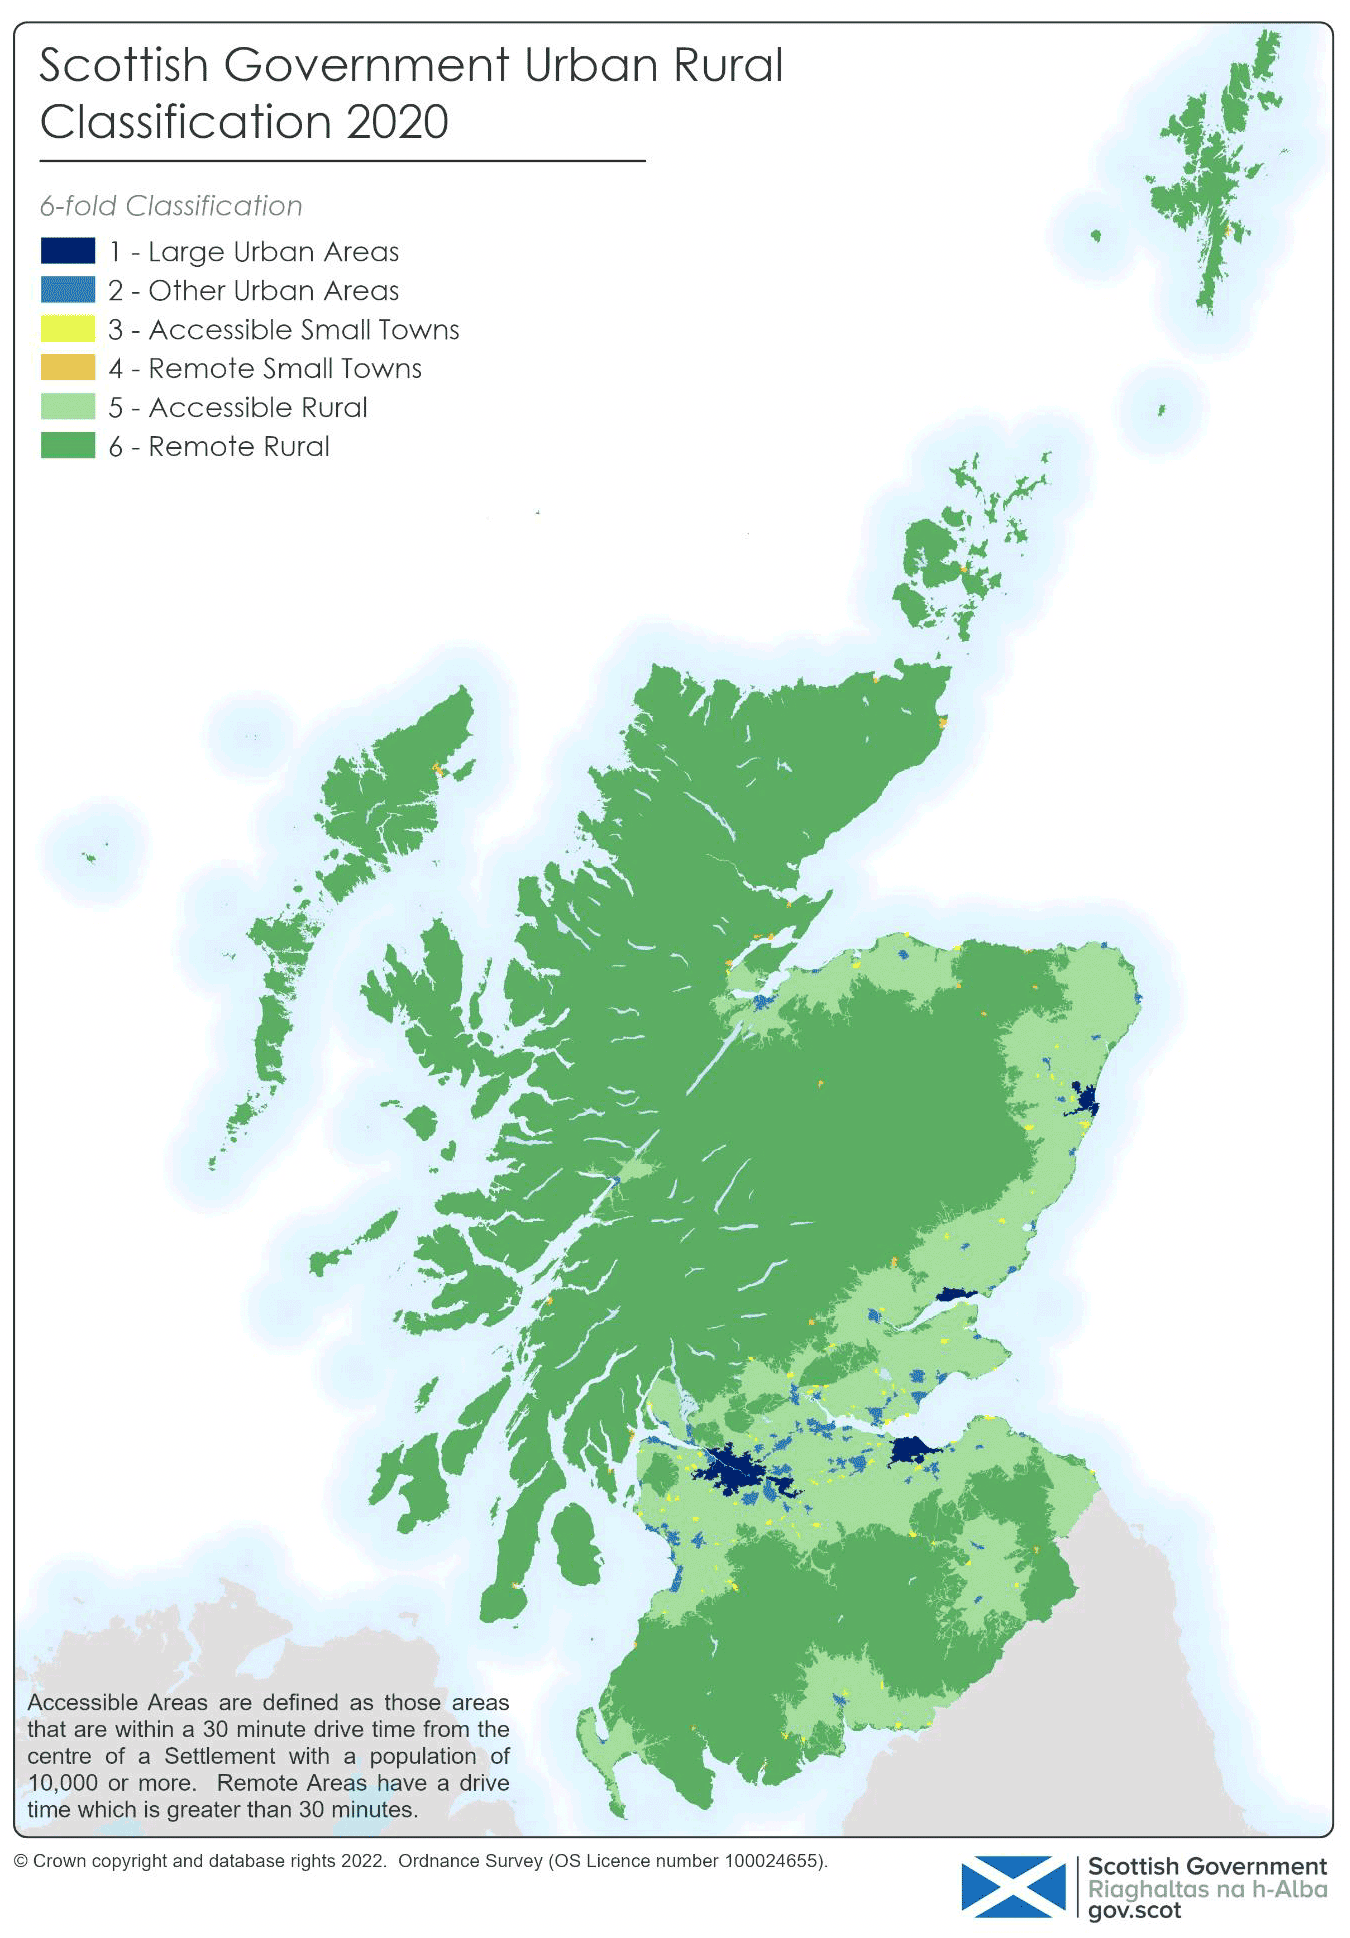 The map shows Scotland at national scale.  Scotland is classified according to an 6-fold classification represented by six colours.  Large Urban Areas are navy blue, Other Urban Areas are royal blue, Accessible Small Towns are yellow, Remote Small Towns are orange, Accessible Rural is light green and Remote Rural is mid-green.

In the 6-fold Urban Rural Classification, Large Urban, Other Urban, Accessible Small Towns, and Remote Small Towns are defined with the same parameters as in the 8-fold Classification.   The 8-fold Classifications of Remote Small Towns and Very Remote Small Towns have been combined to form the 6-fold Classification of Remote Small Towns.  Similarly, the 8-fold Classifications of Remote Rural and Very Remote Rural have been combined to form the 6-fold Classification of Remote Rural.  
